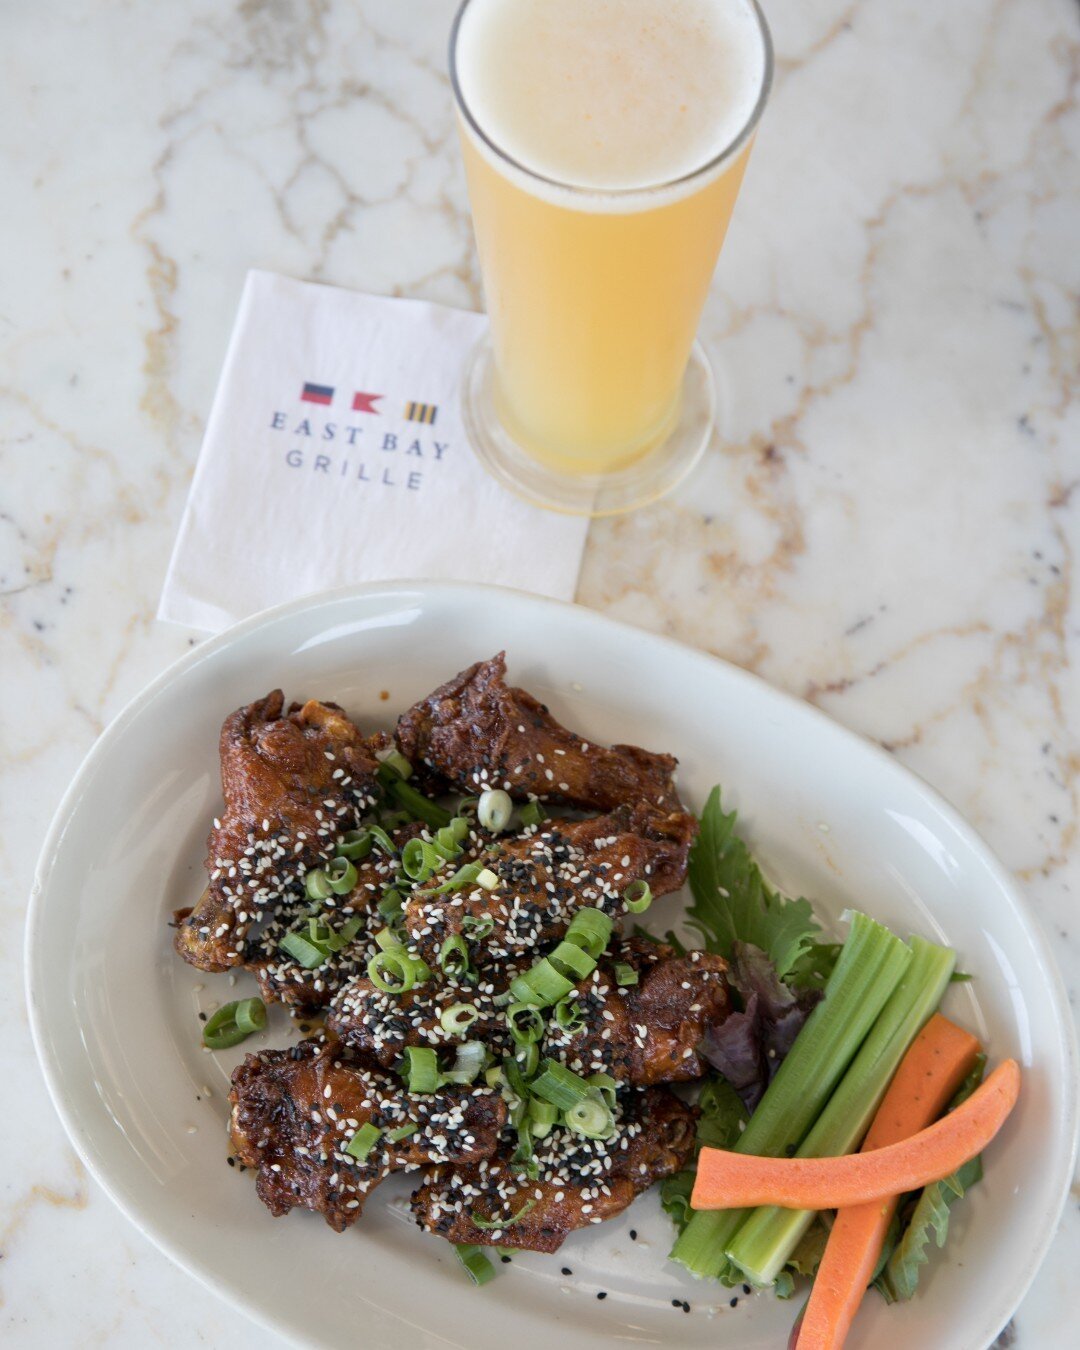 These Japanese BBQ Wings are straight 🔥 - tossed with Japanese BBQ and sriracha sauce, sesame seeds, and scallions.